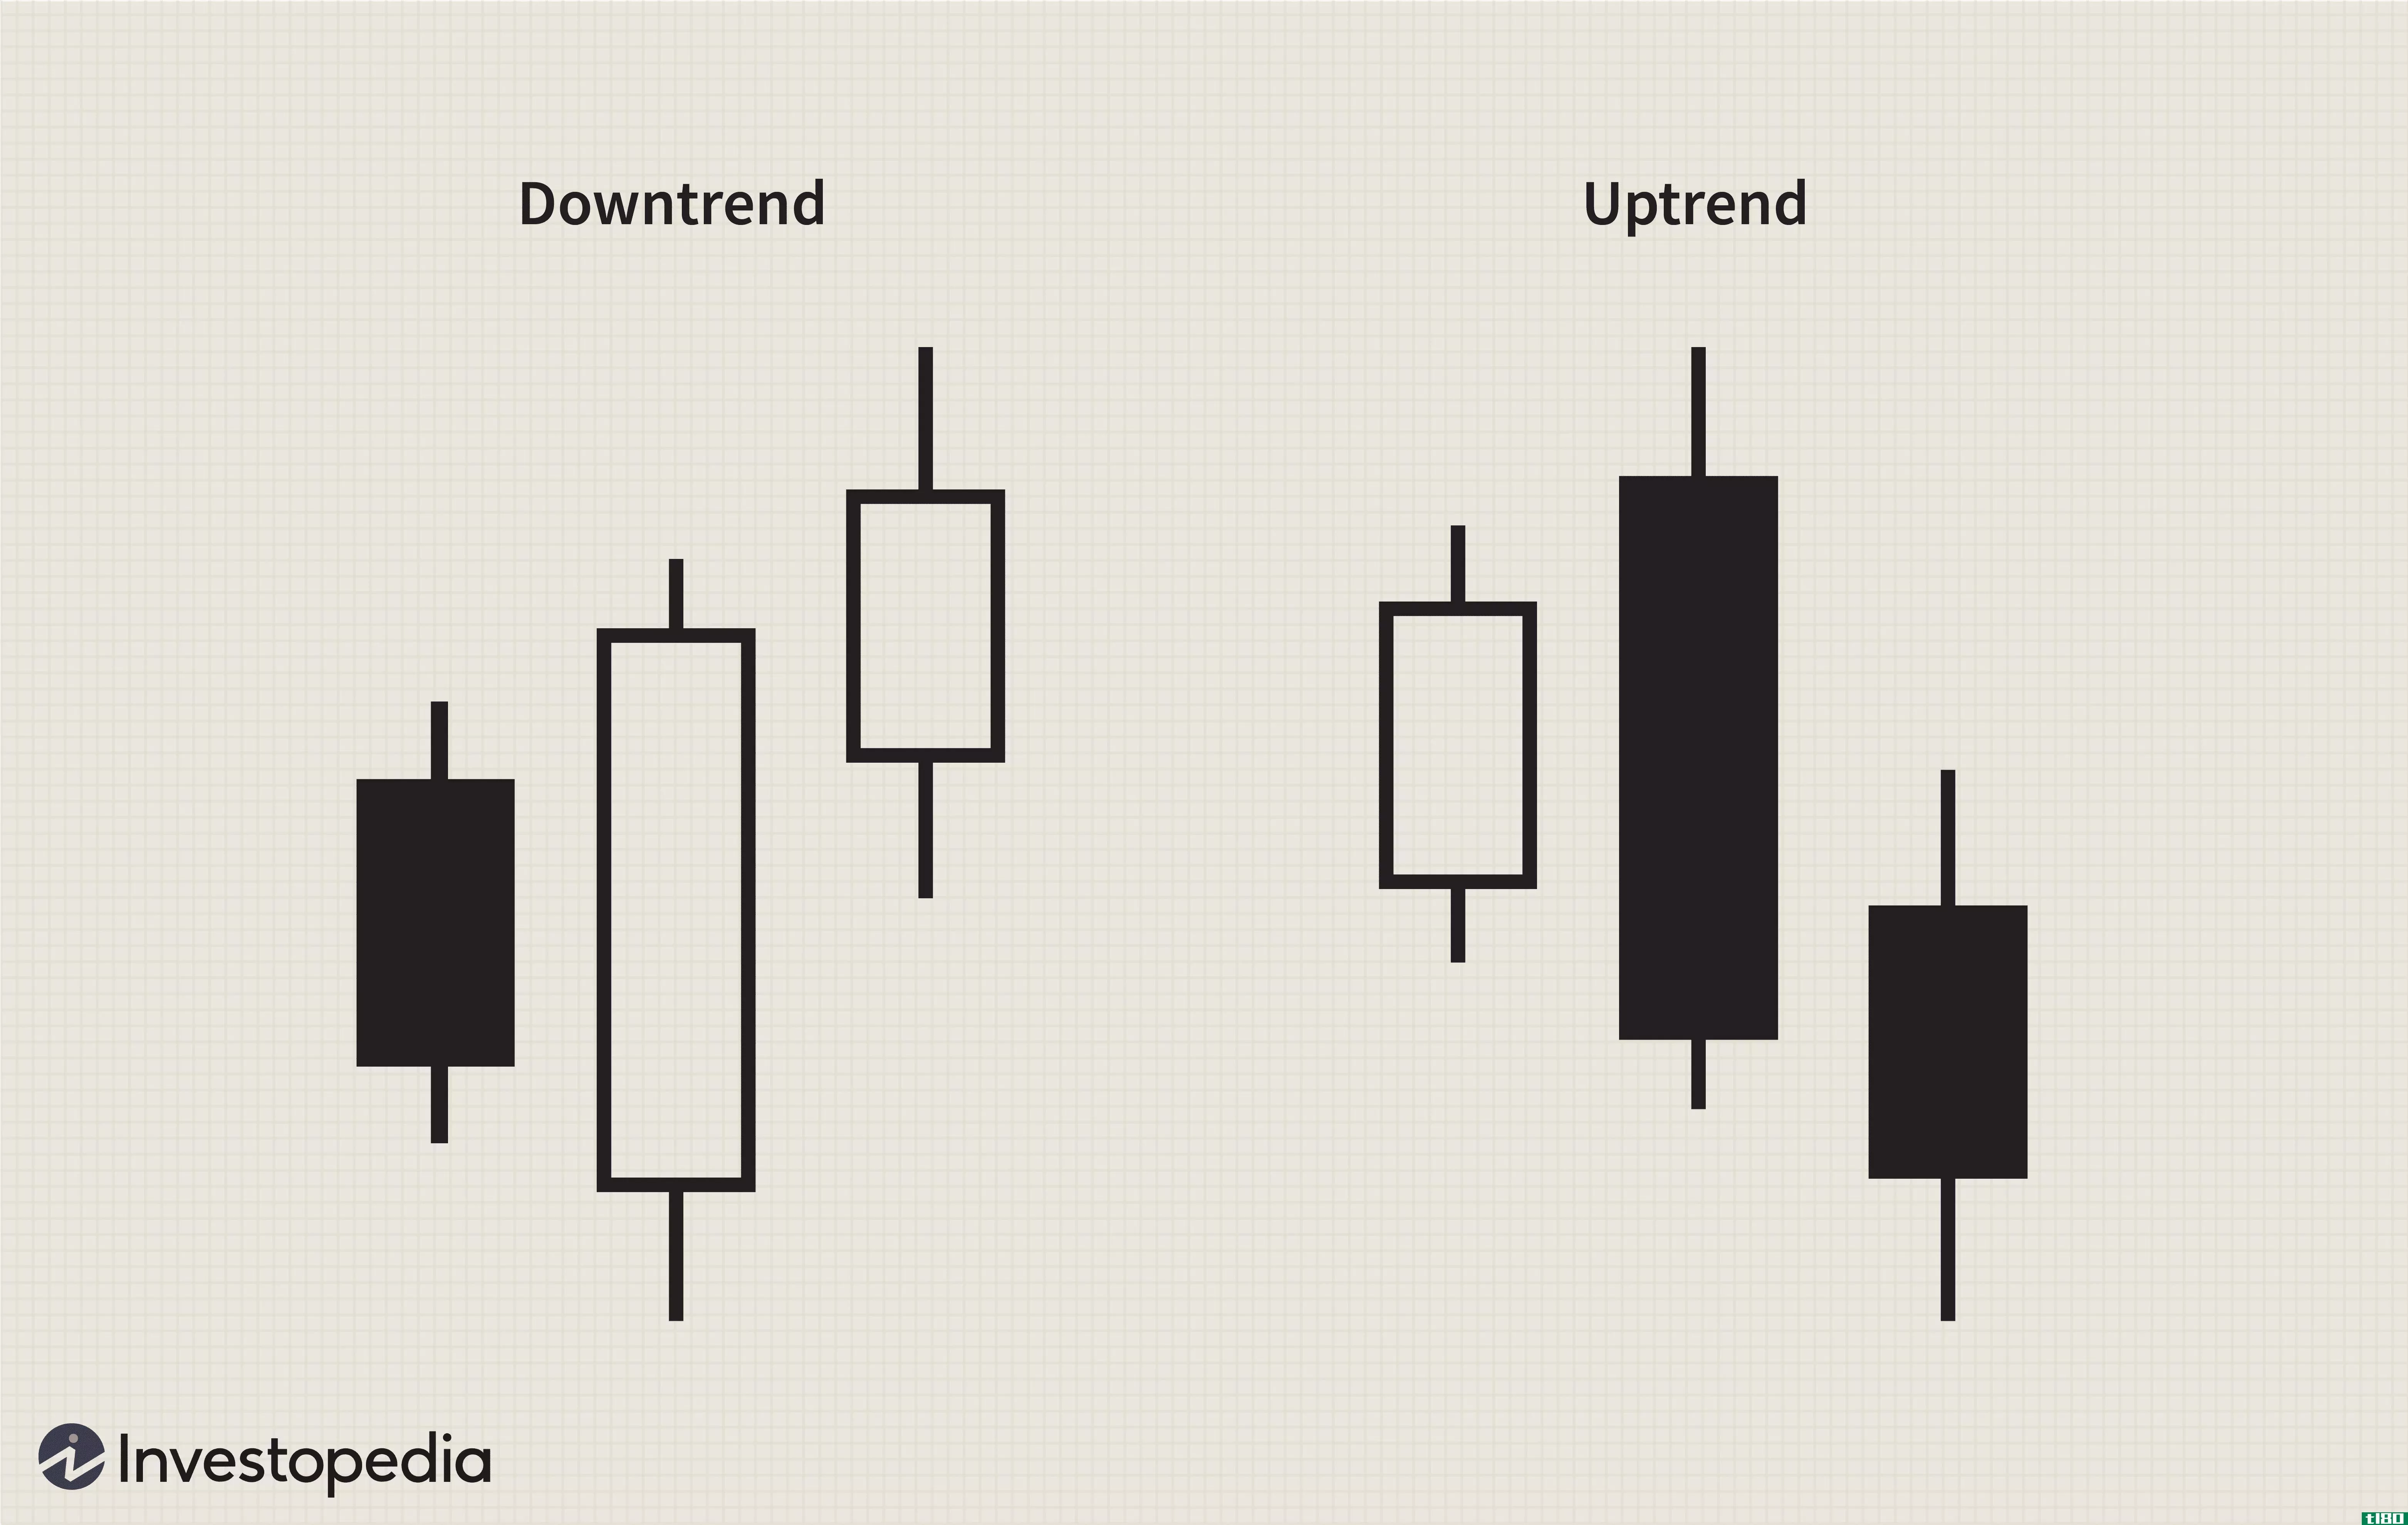 Up/down trend